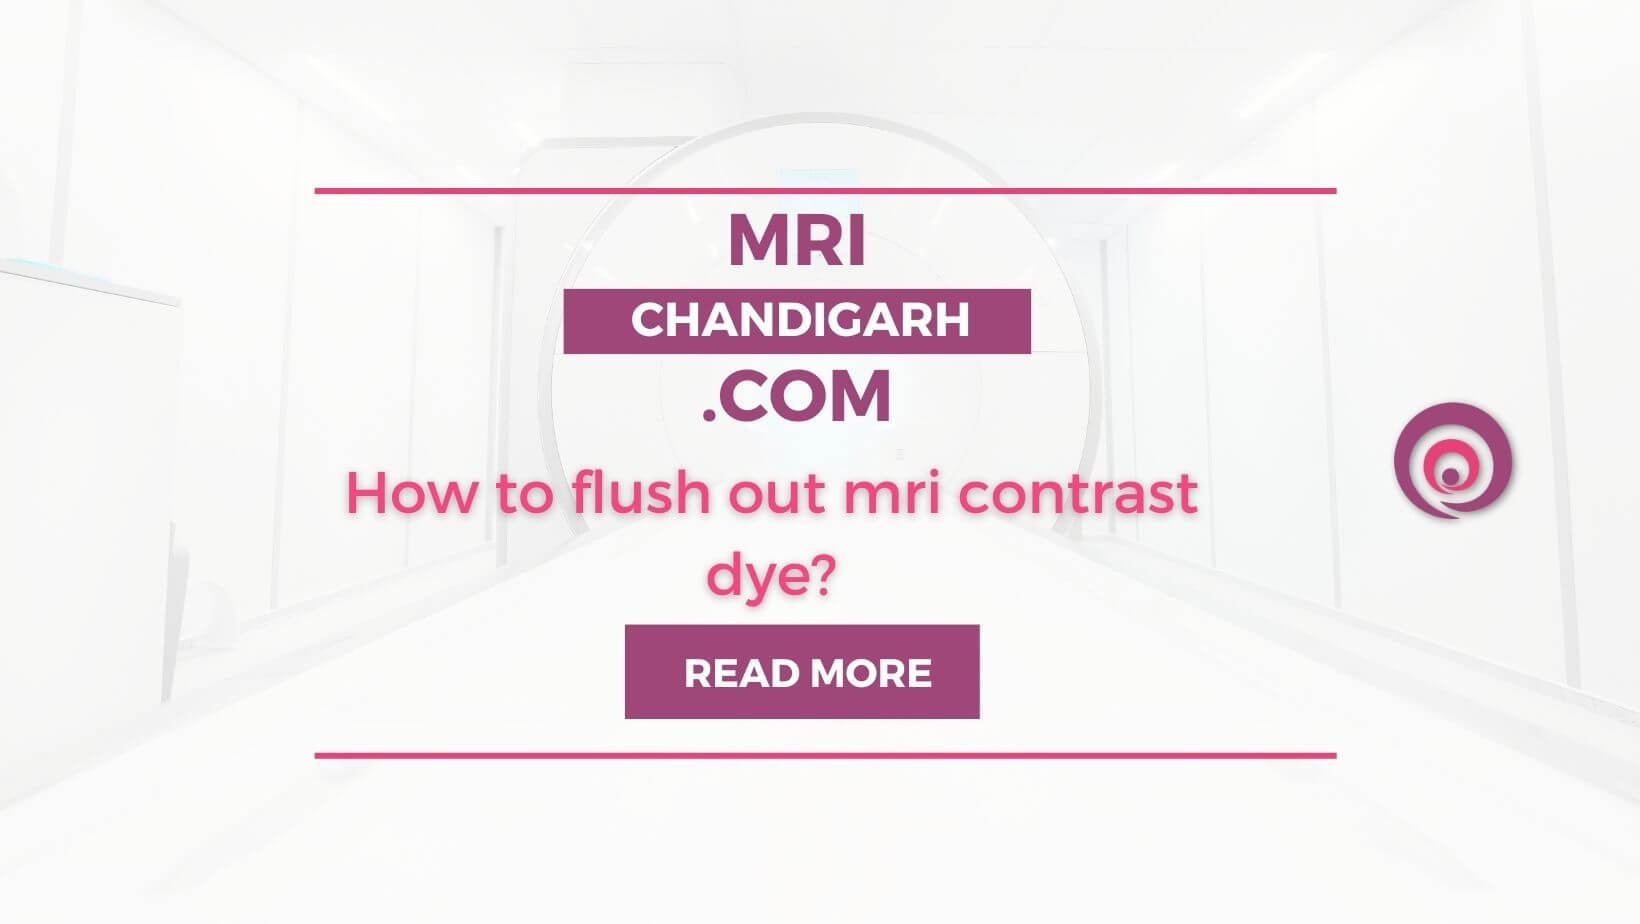 How to flush out mri contrast dye?